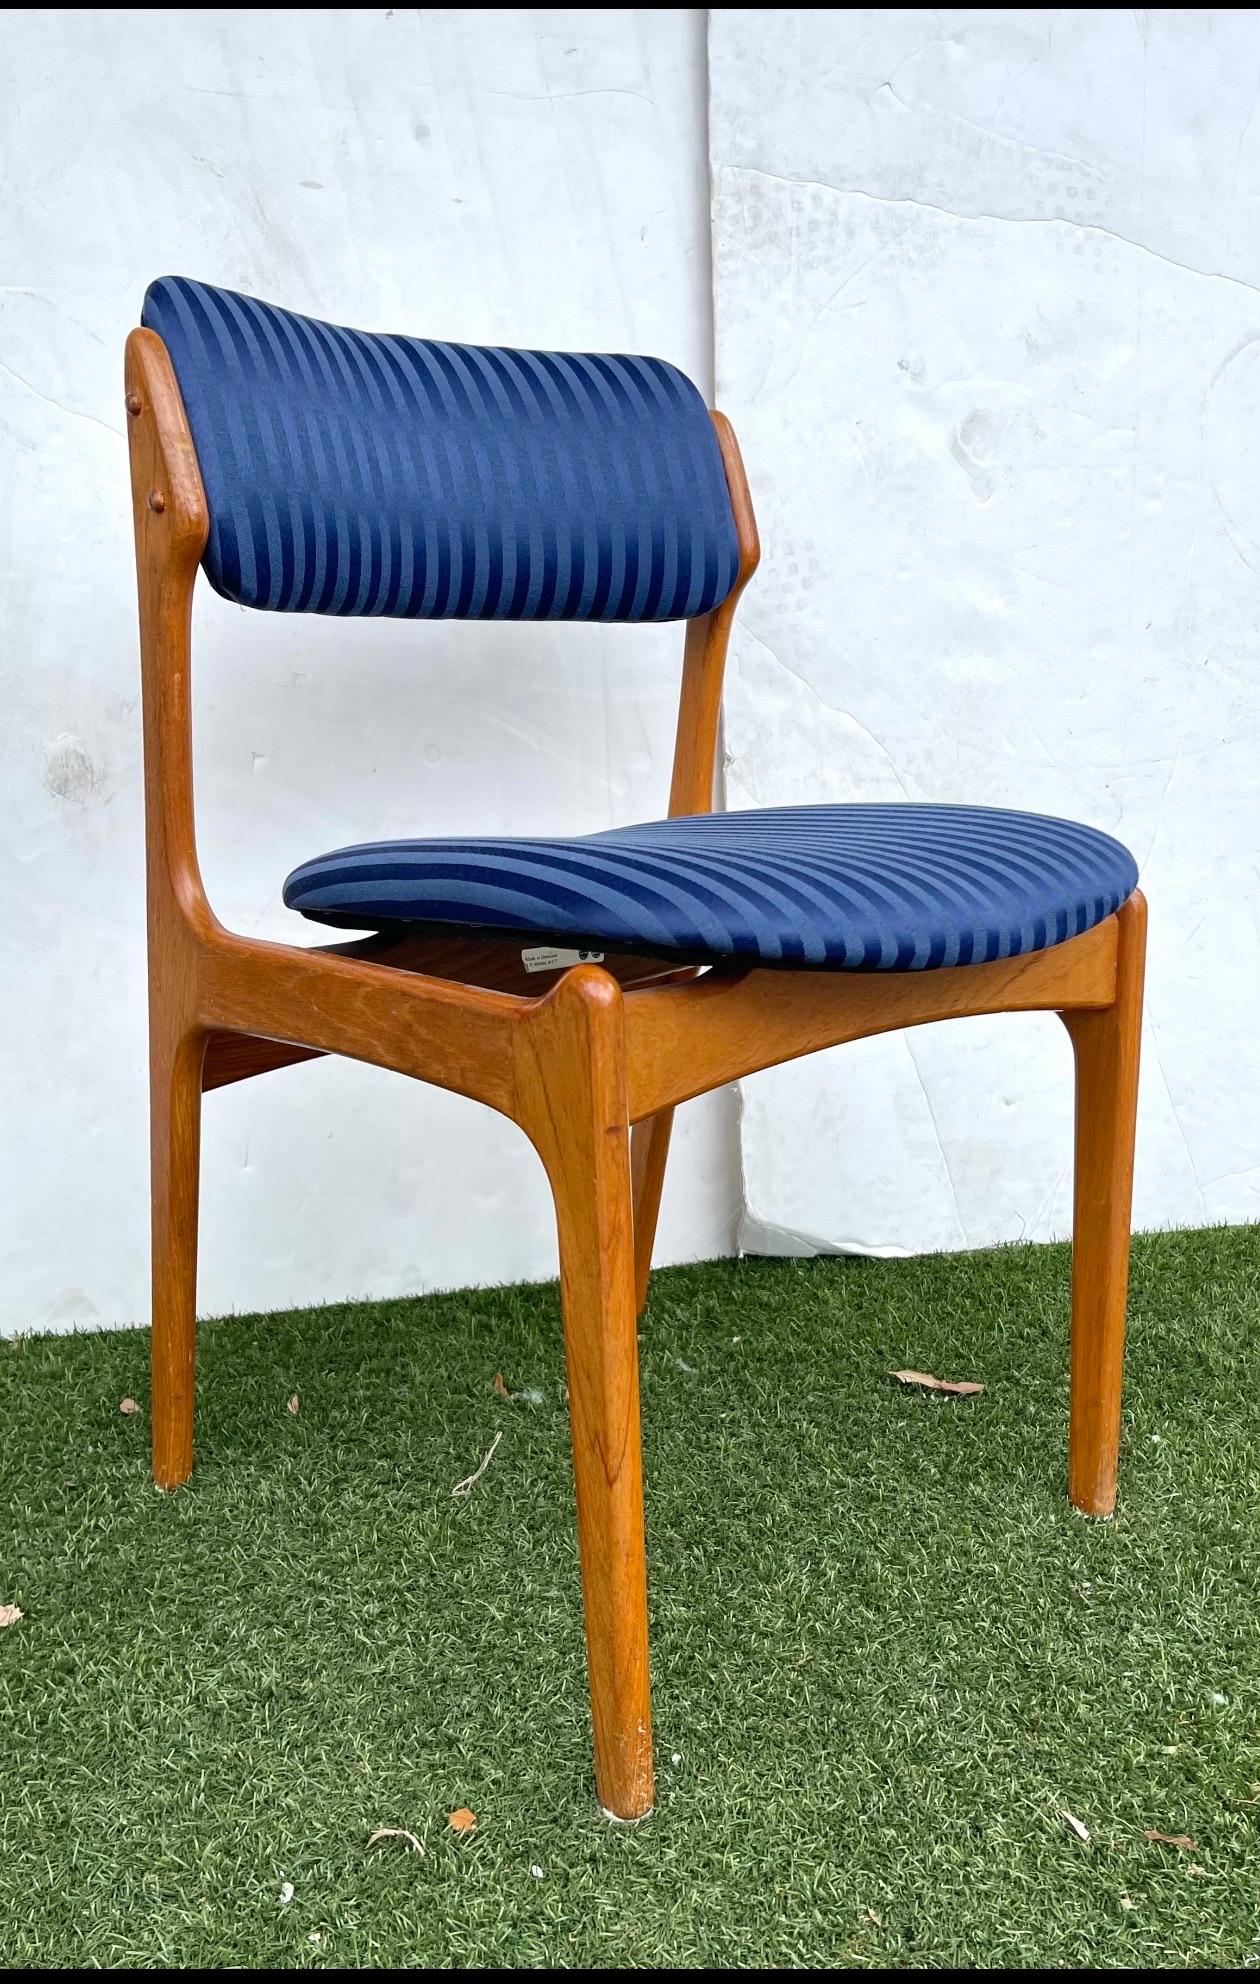 A set of 4 teak chairs by Erik Buch for O.D. Mobler A-S
The chairs have a wonderful sculptural feel to them. 
Design is enhanced by an almost floating appearance of the cushions on the frame
Seat height is 18” high.